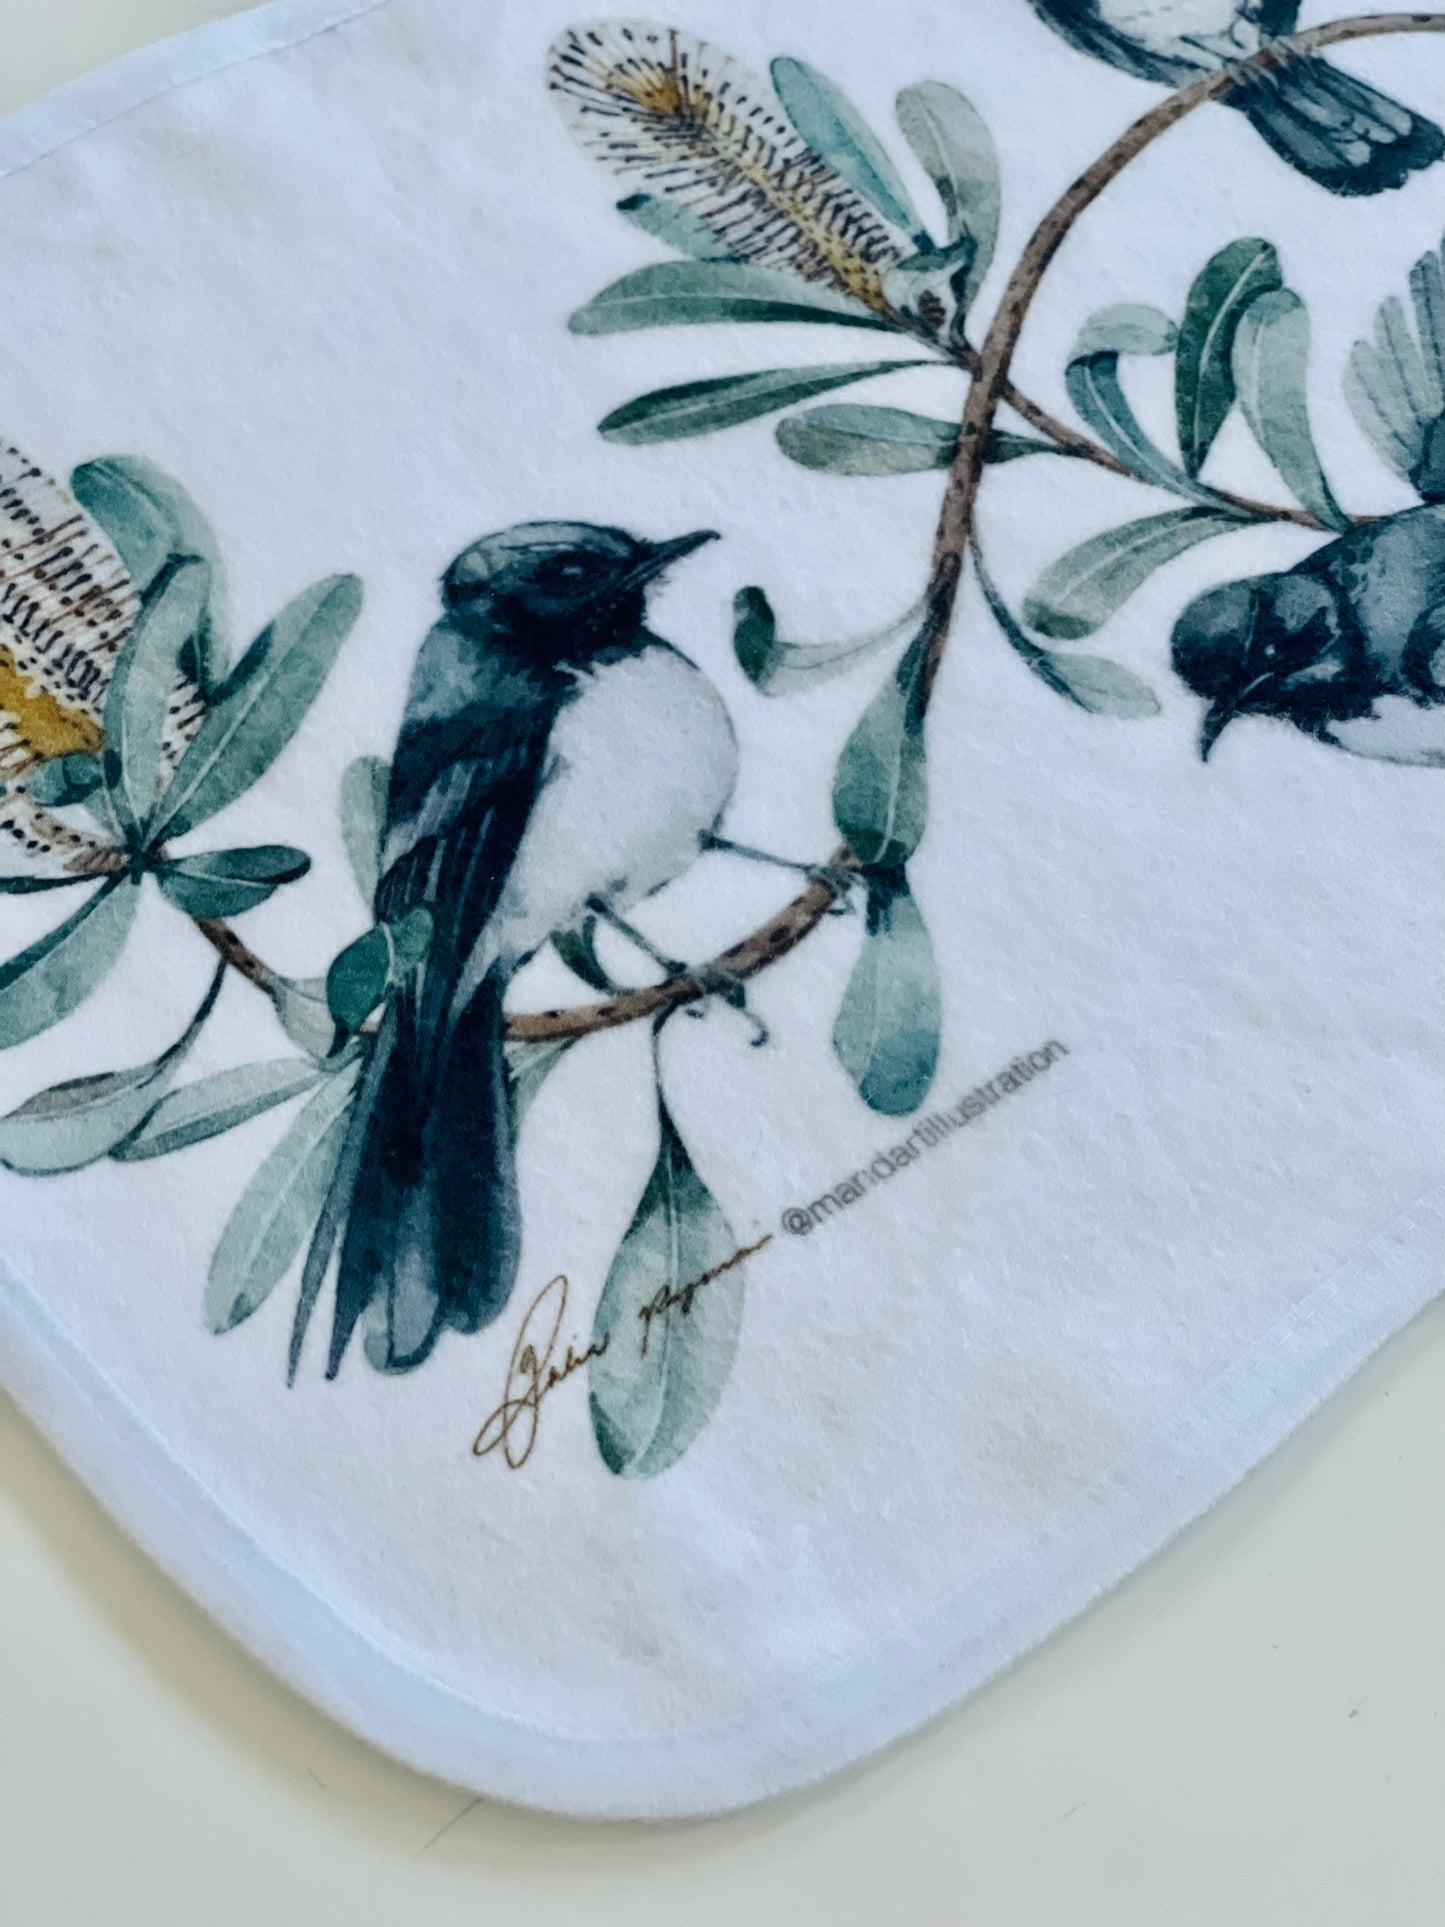 Willie wagtails fleece cloth